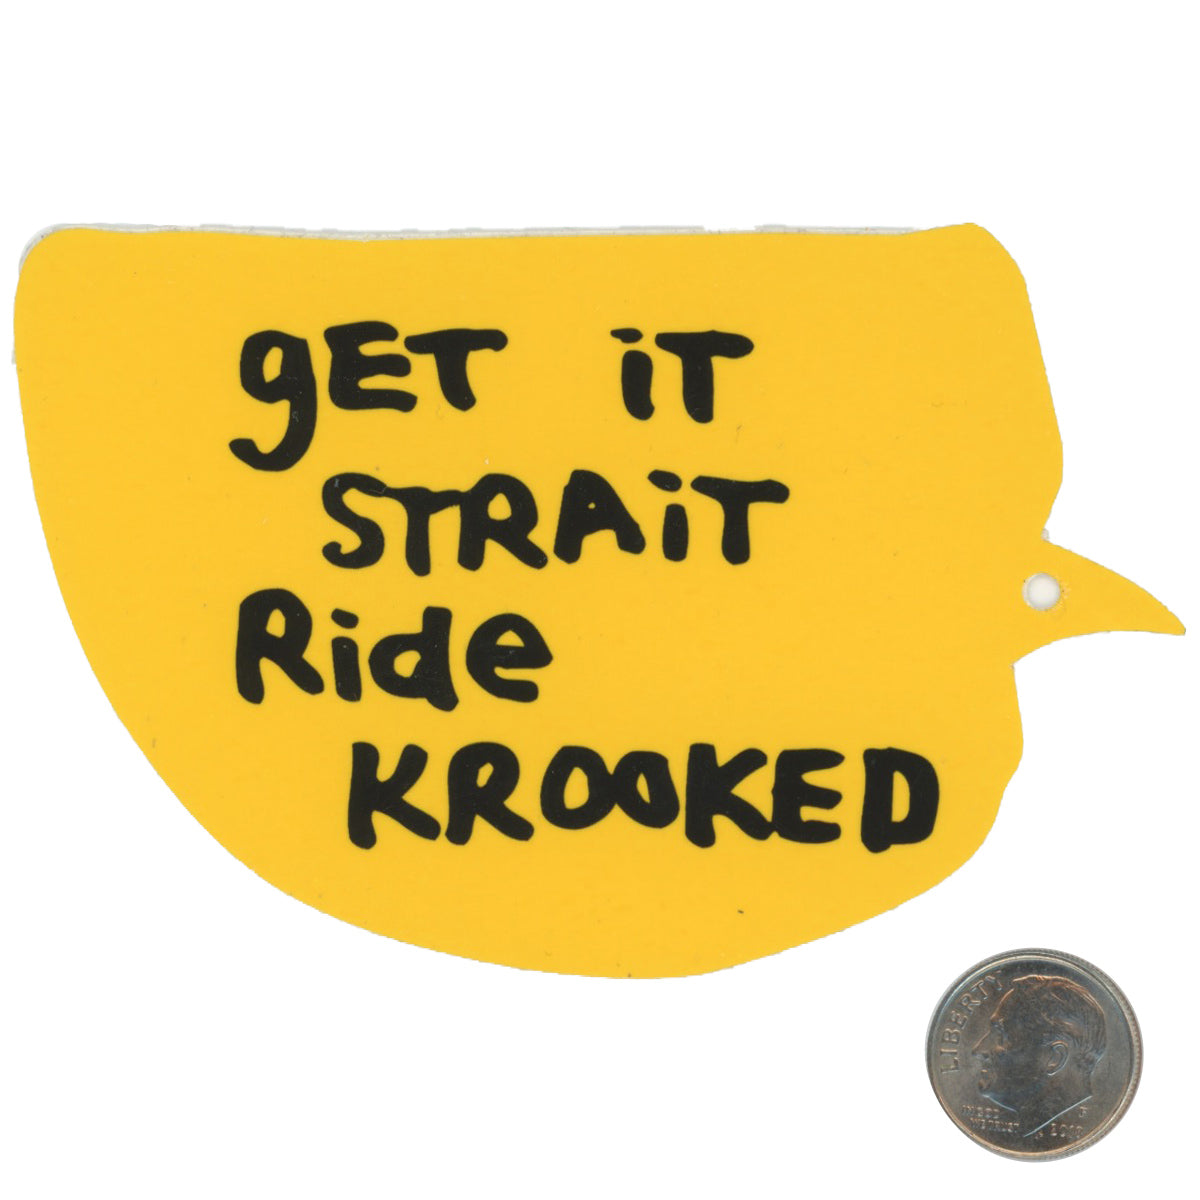 Krooked Skateboards gET iT STRAiT Ride KROOKED Yellow Sticker with dime